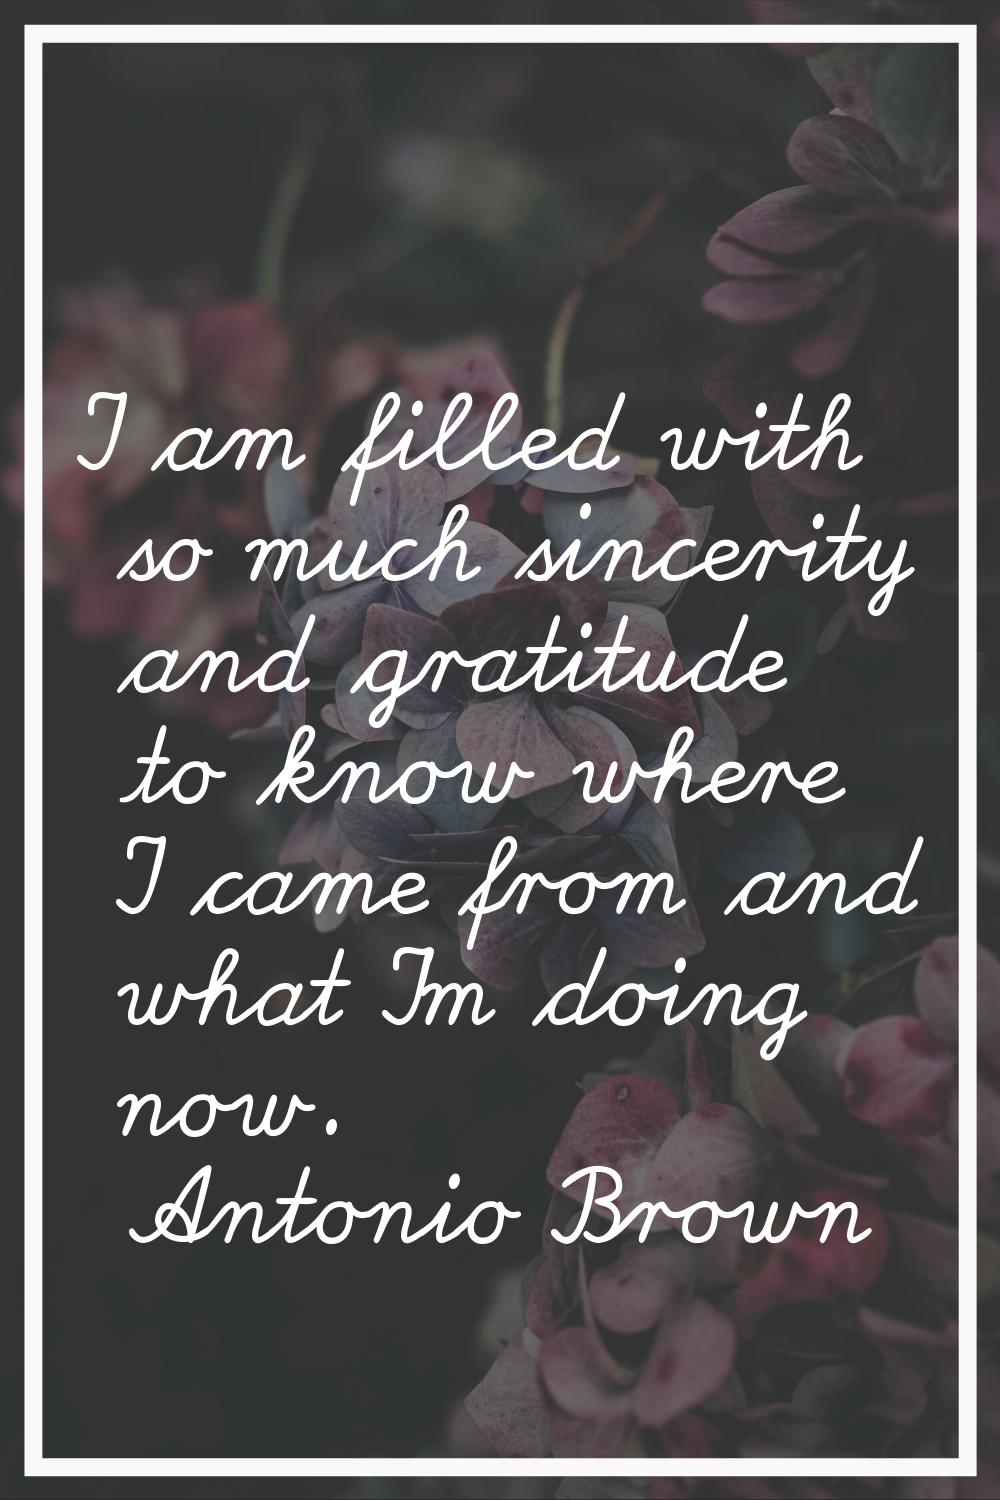 I am filled with so much sincerity and gratitude to know where I came from and what I'm doing now.